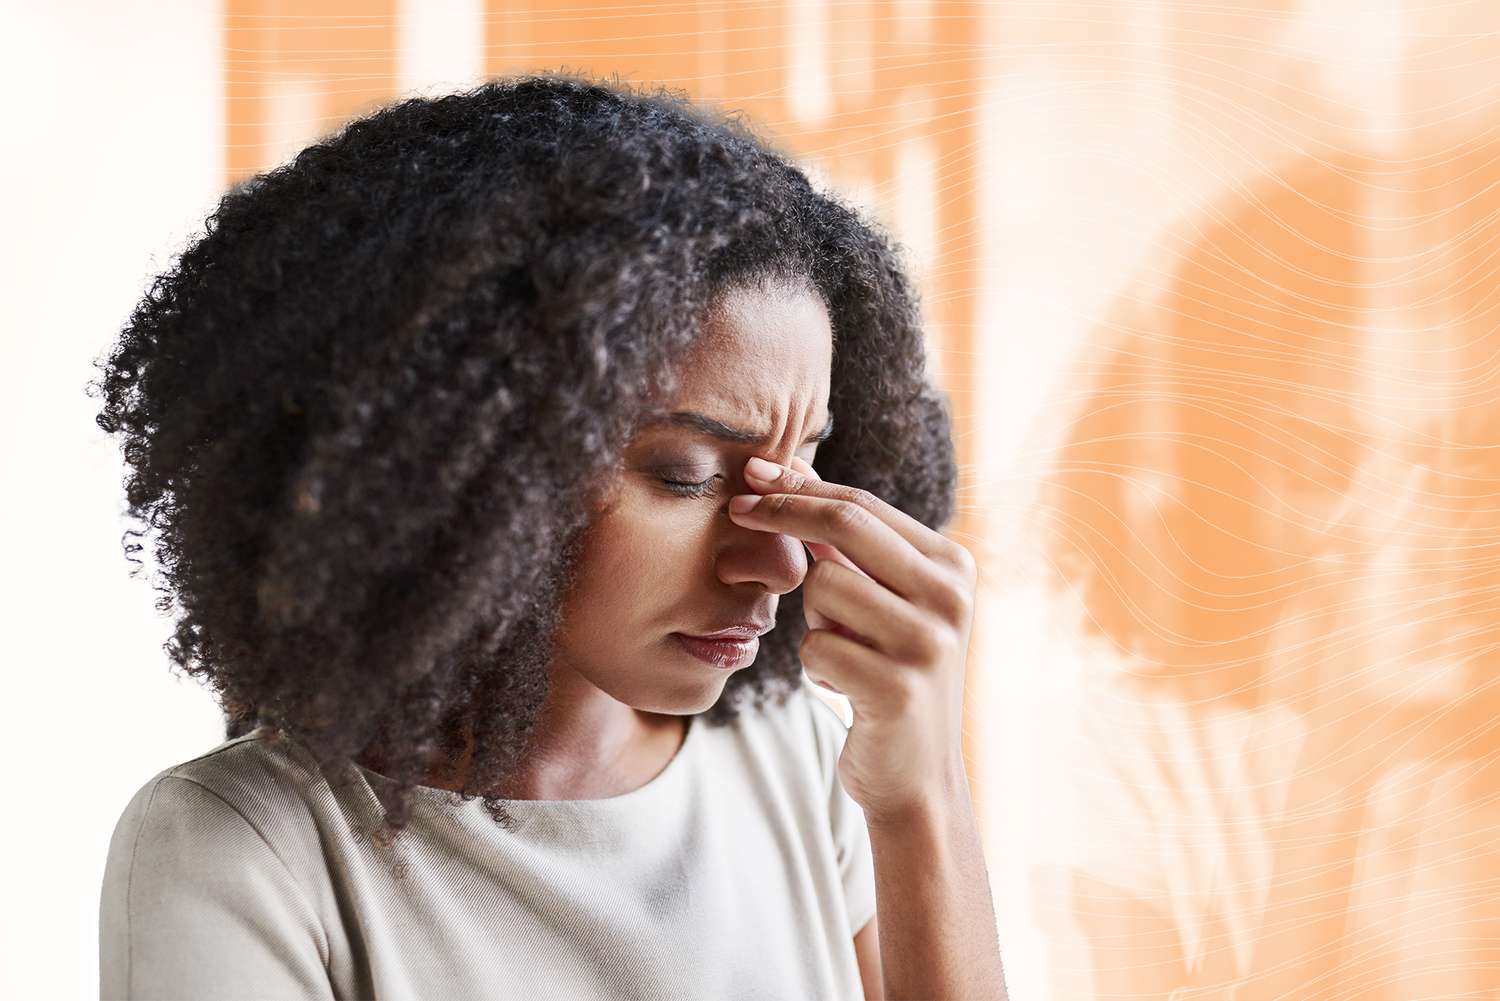 Woman suffering from a migraine